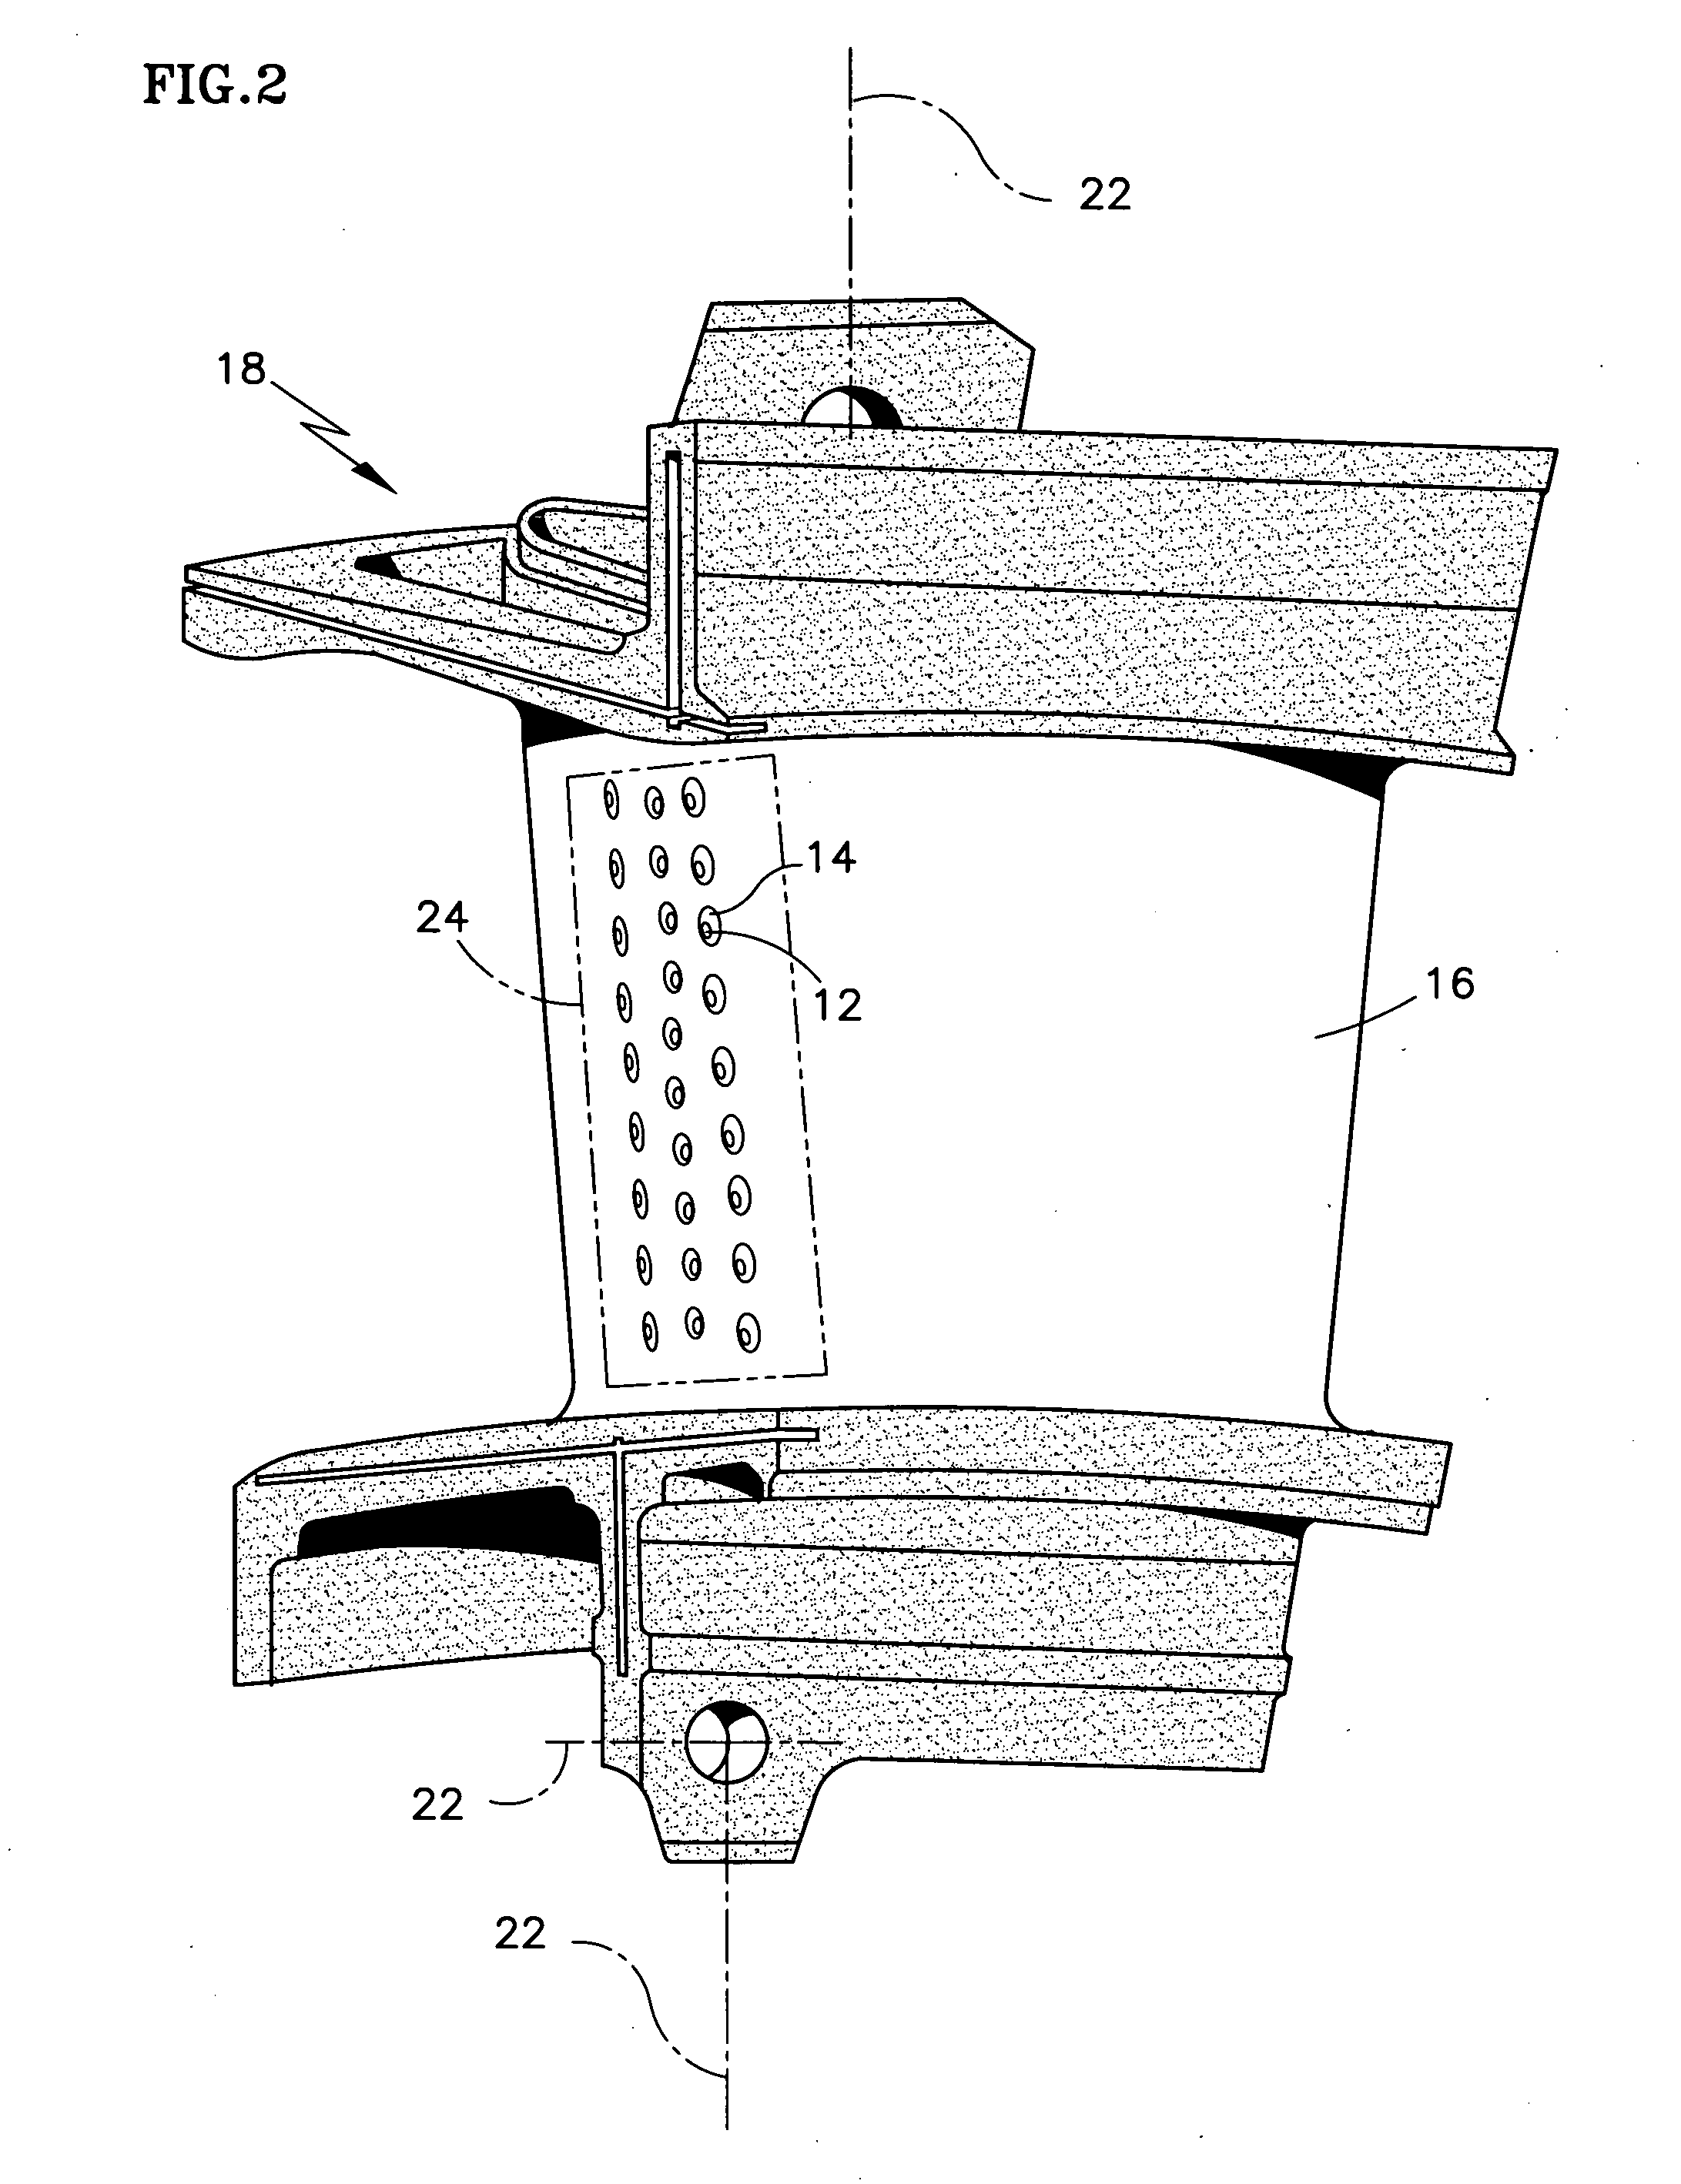 Thermal imaging and laser scanning systems and methods for determining the location and angular orientation of a hole with an obstructed opening residing on a surface of an article